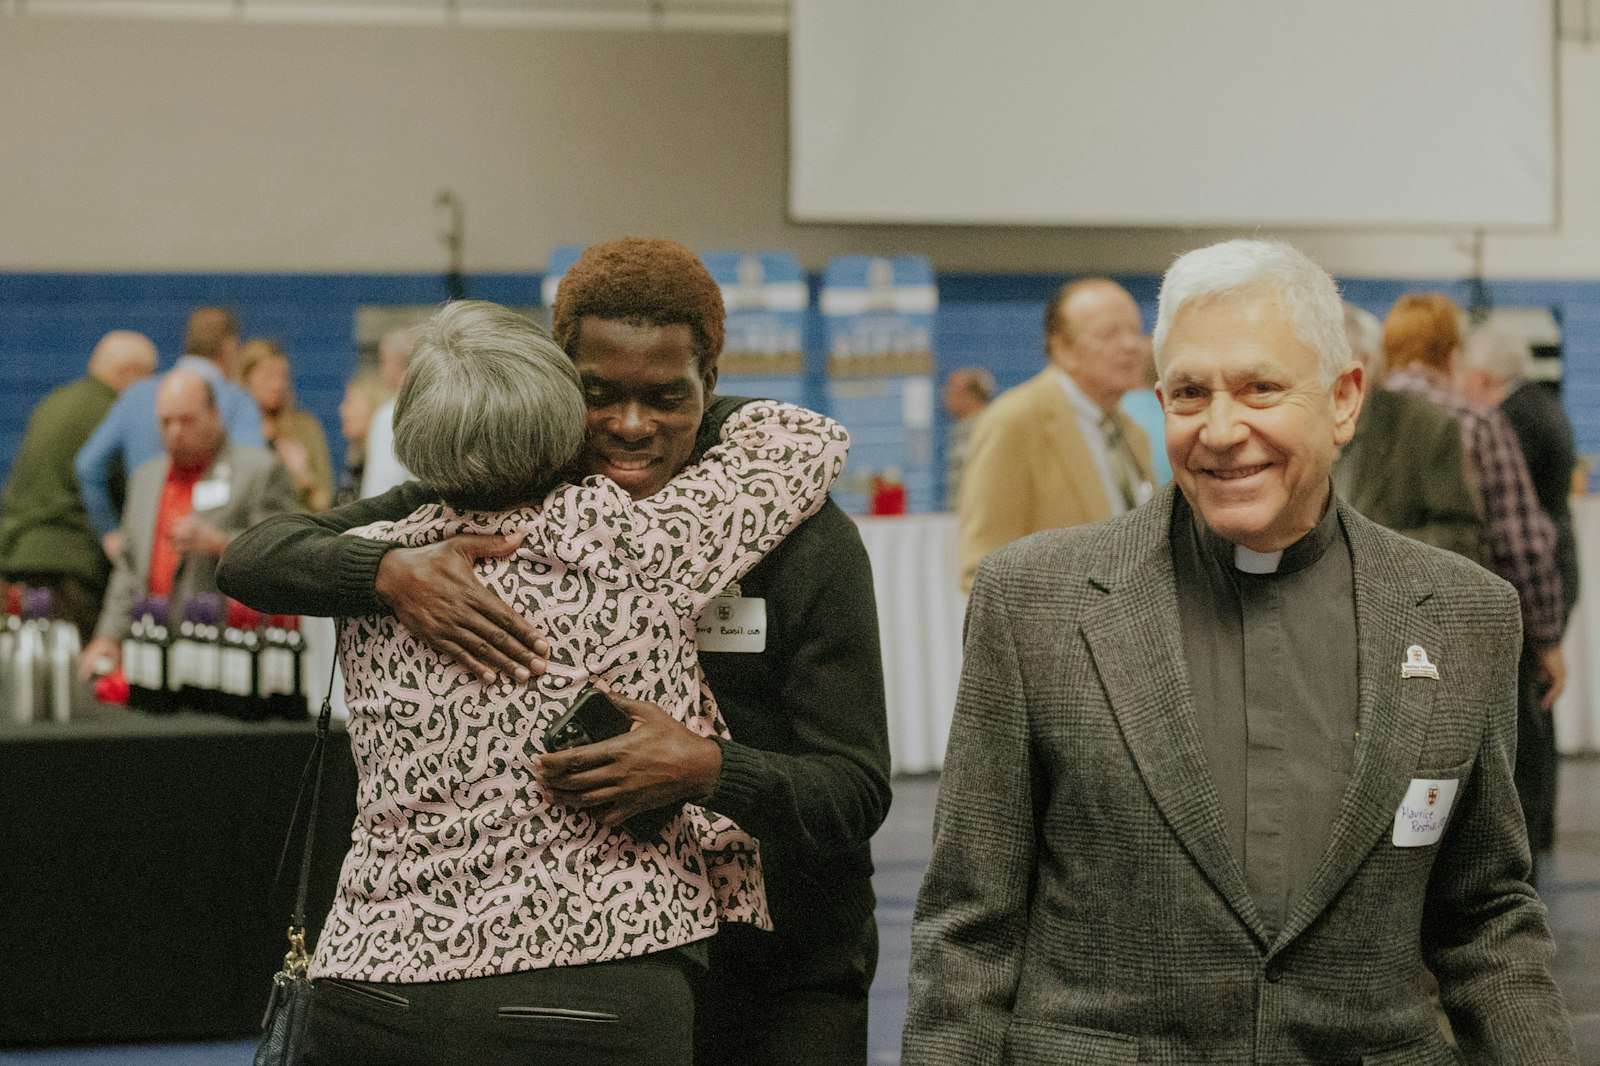 Bro. David Basil, OSB, receives a hug from a supporter during Catholic Central's celebratory event Nov. 19 while Fr. Maurice Restivo, CSB, smiles.